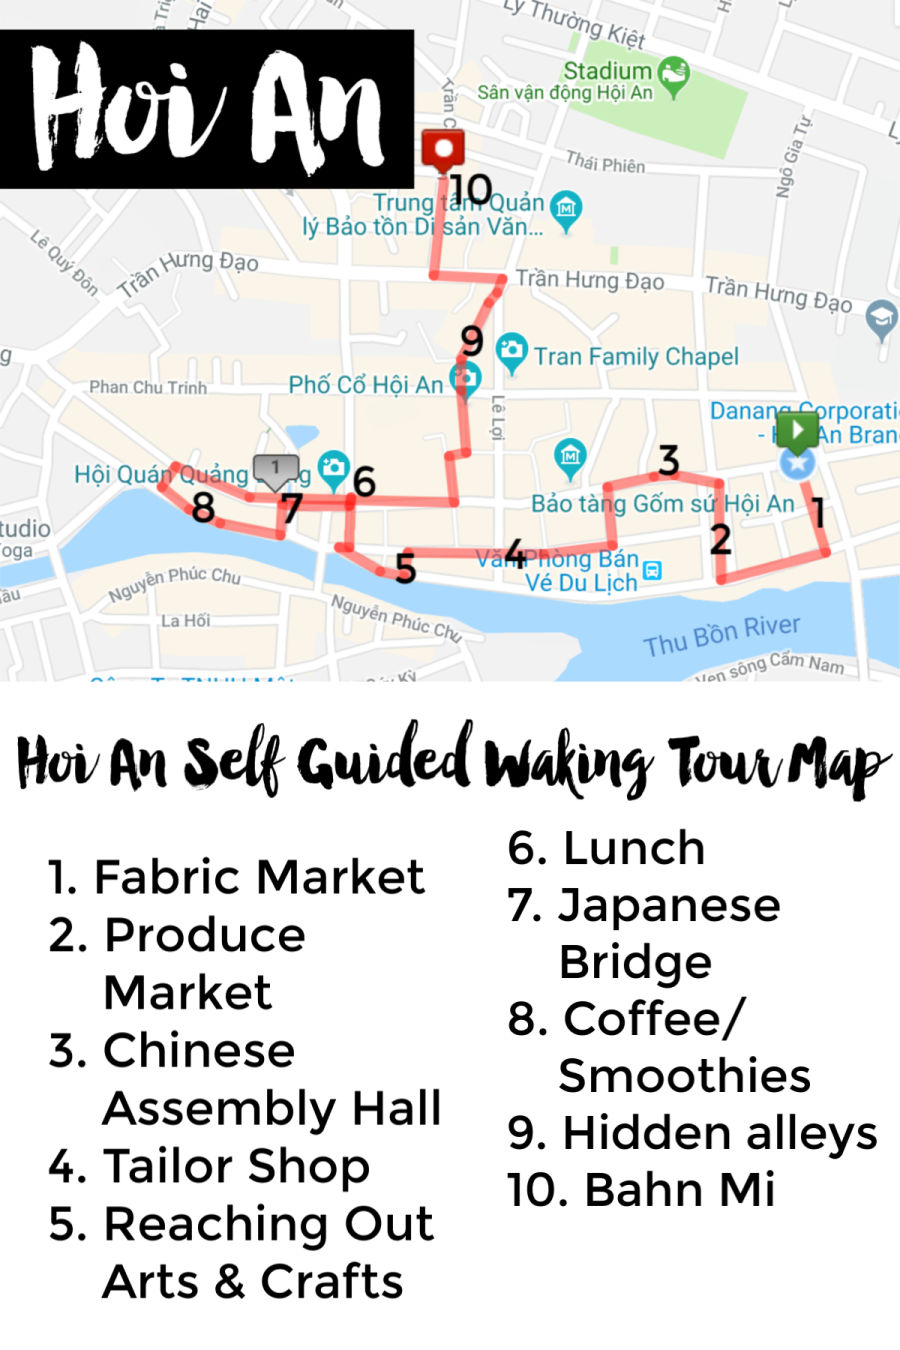 Self guided walking tour Hoi An, Vietnam - What to do and see in Ancient Town on your first day